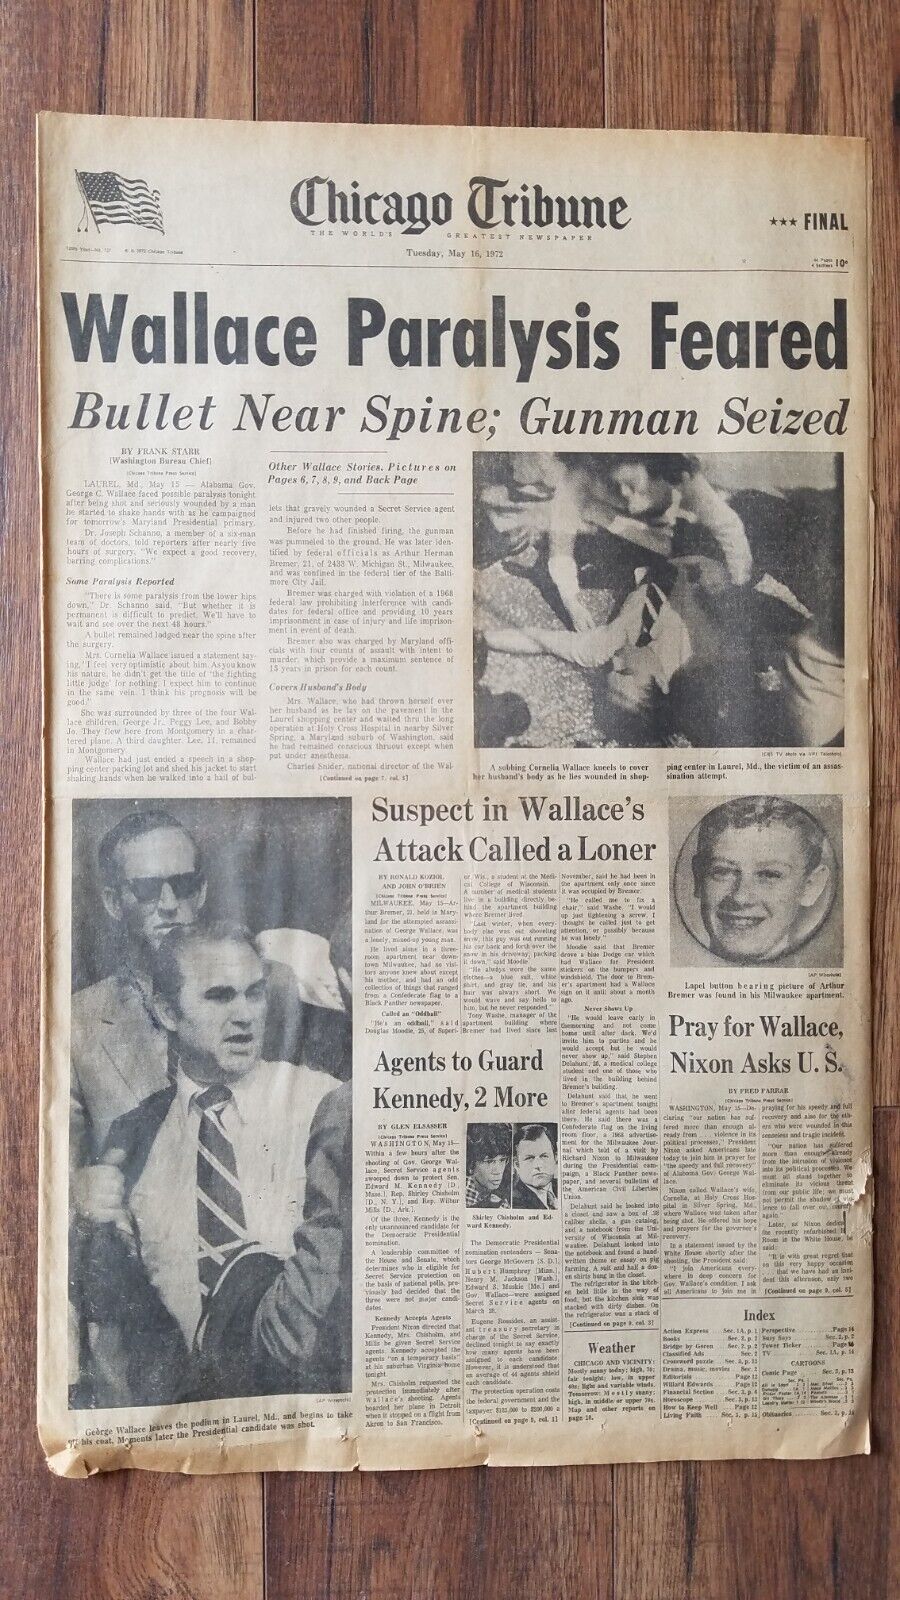 WALLACE PARALYSIS FEARED, newspaper, May 16, 1972